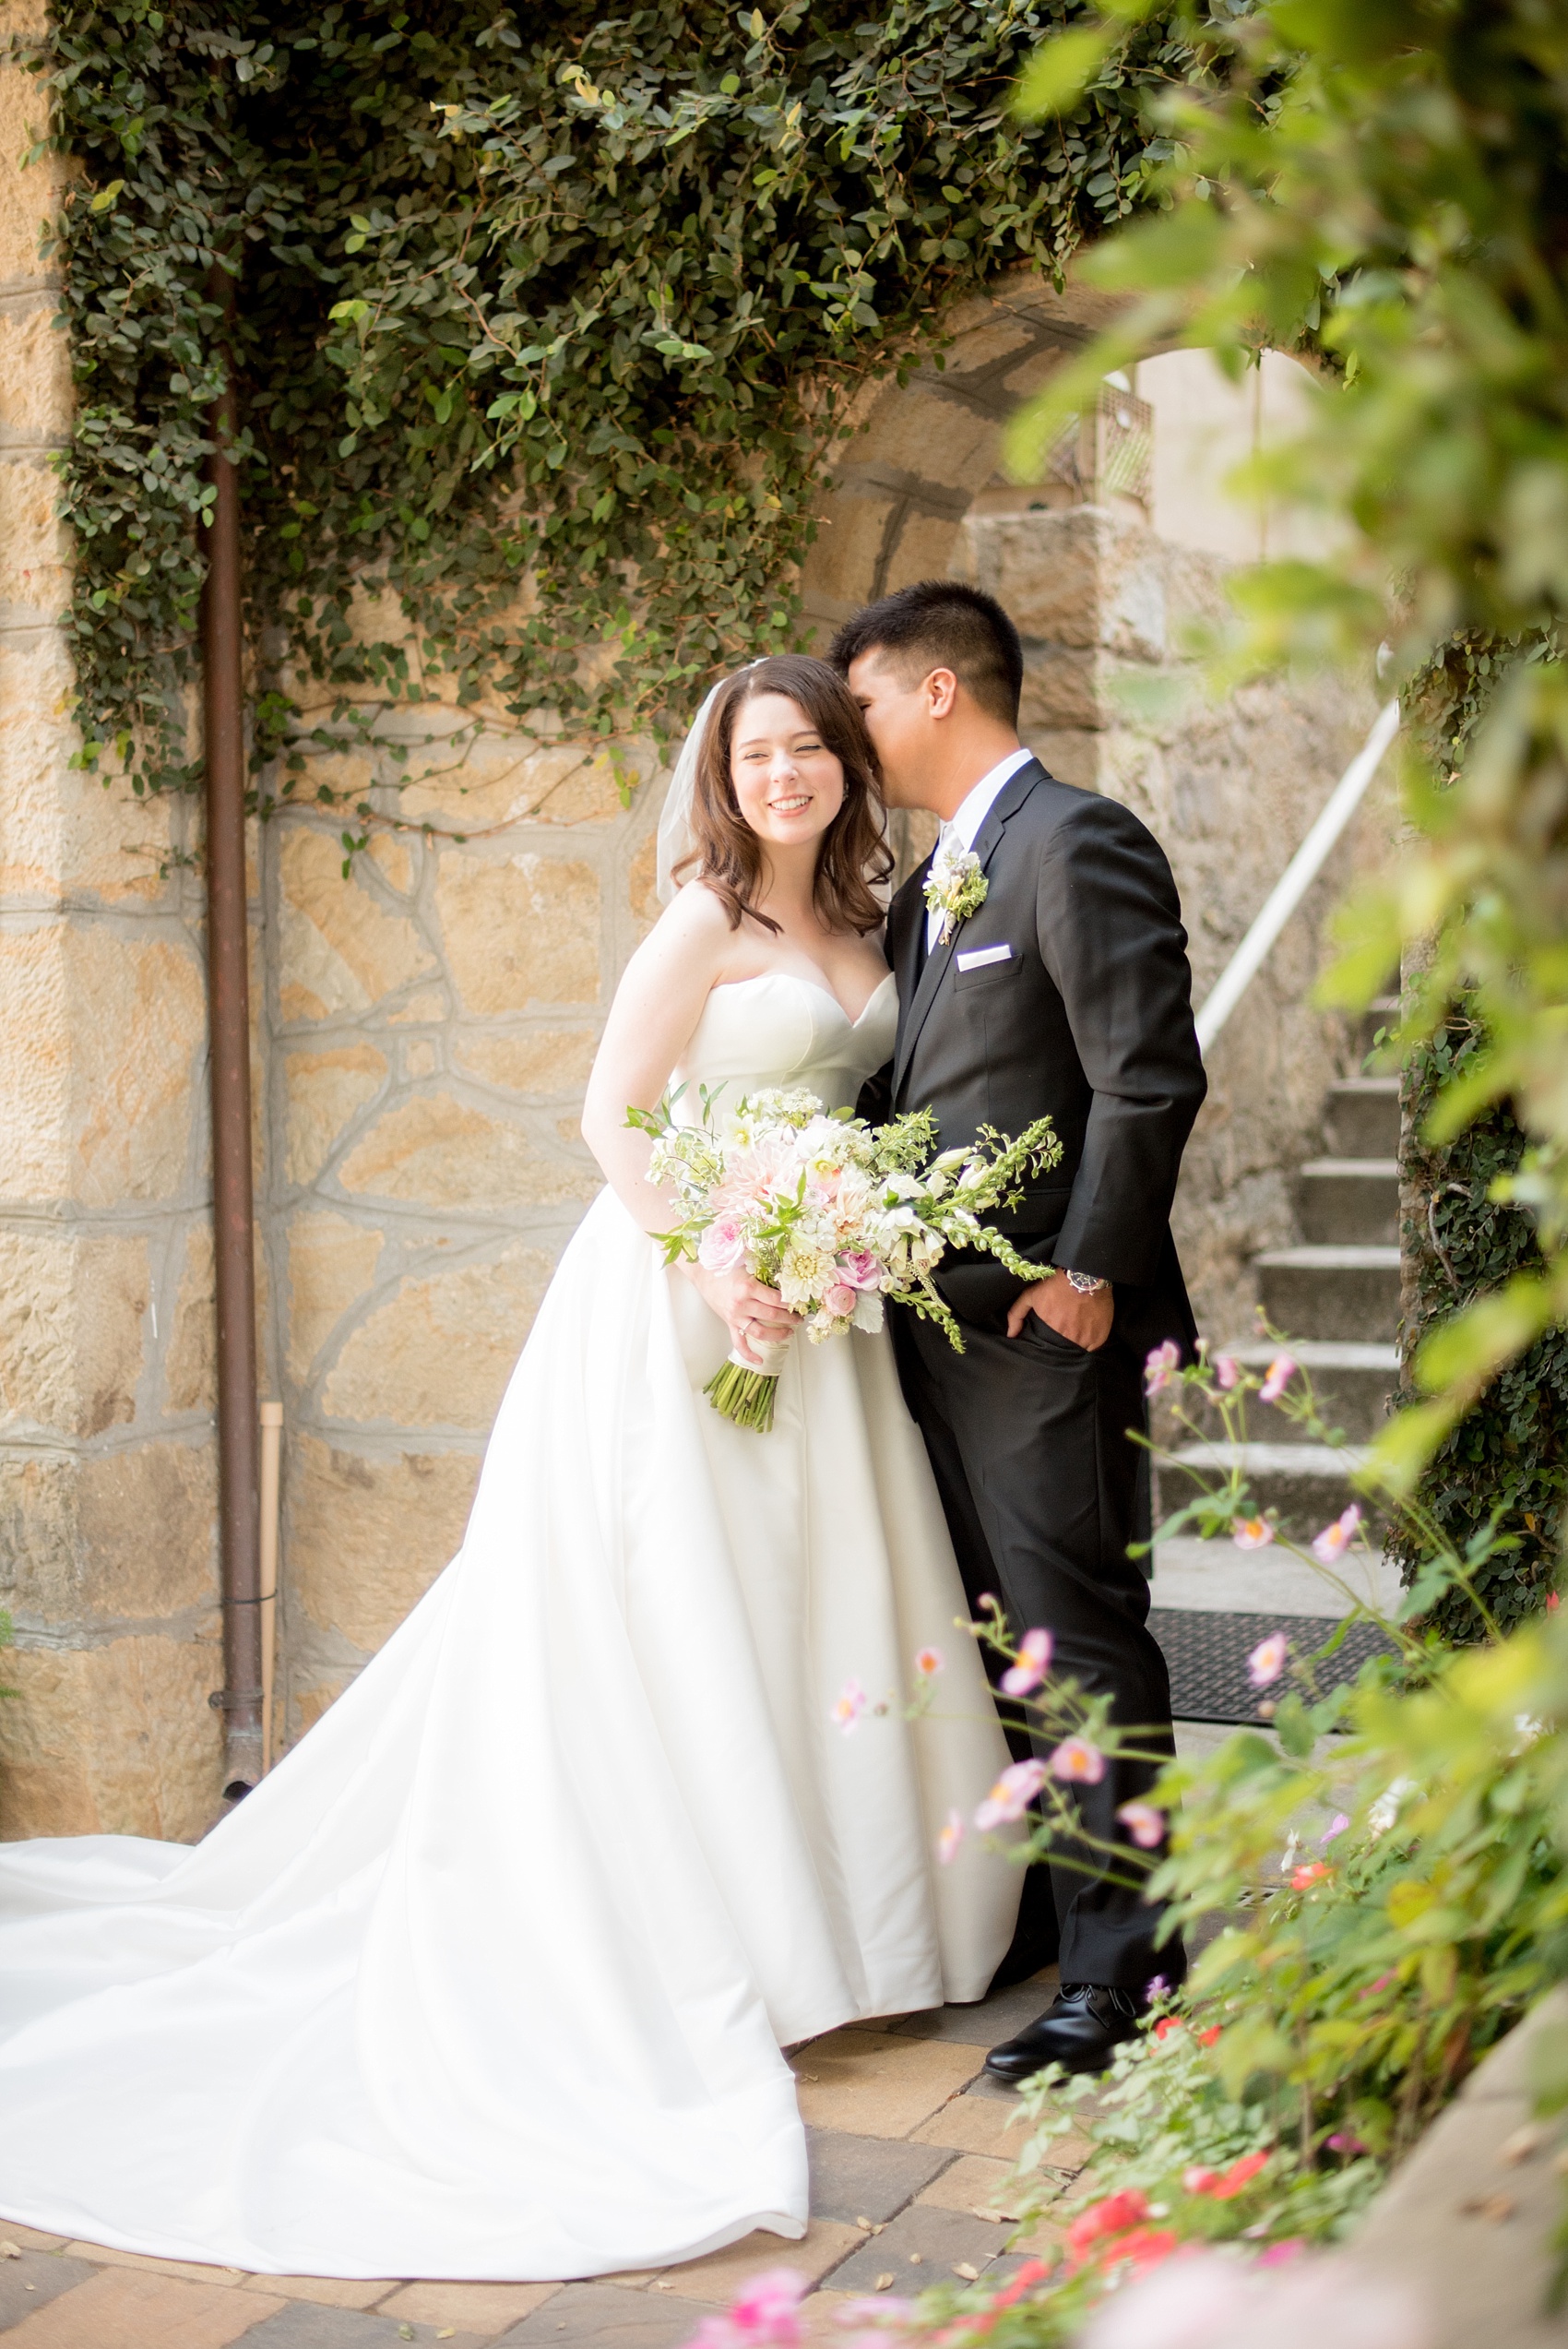 Mikkel Paige Photography photo of the bride and groom at their wedding at Testarossa Winery in Los Gatos, California.